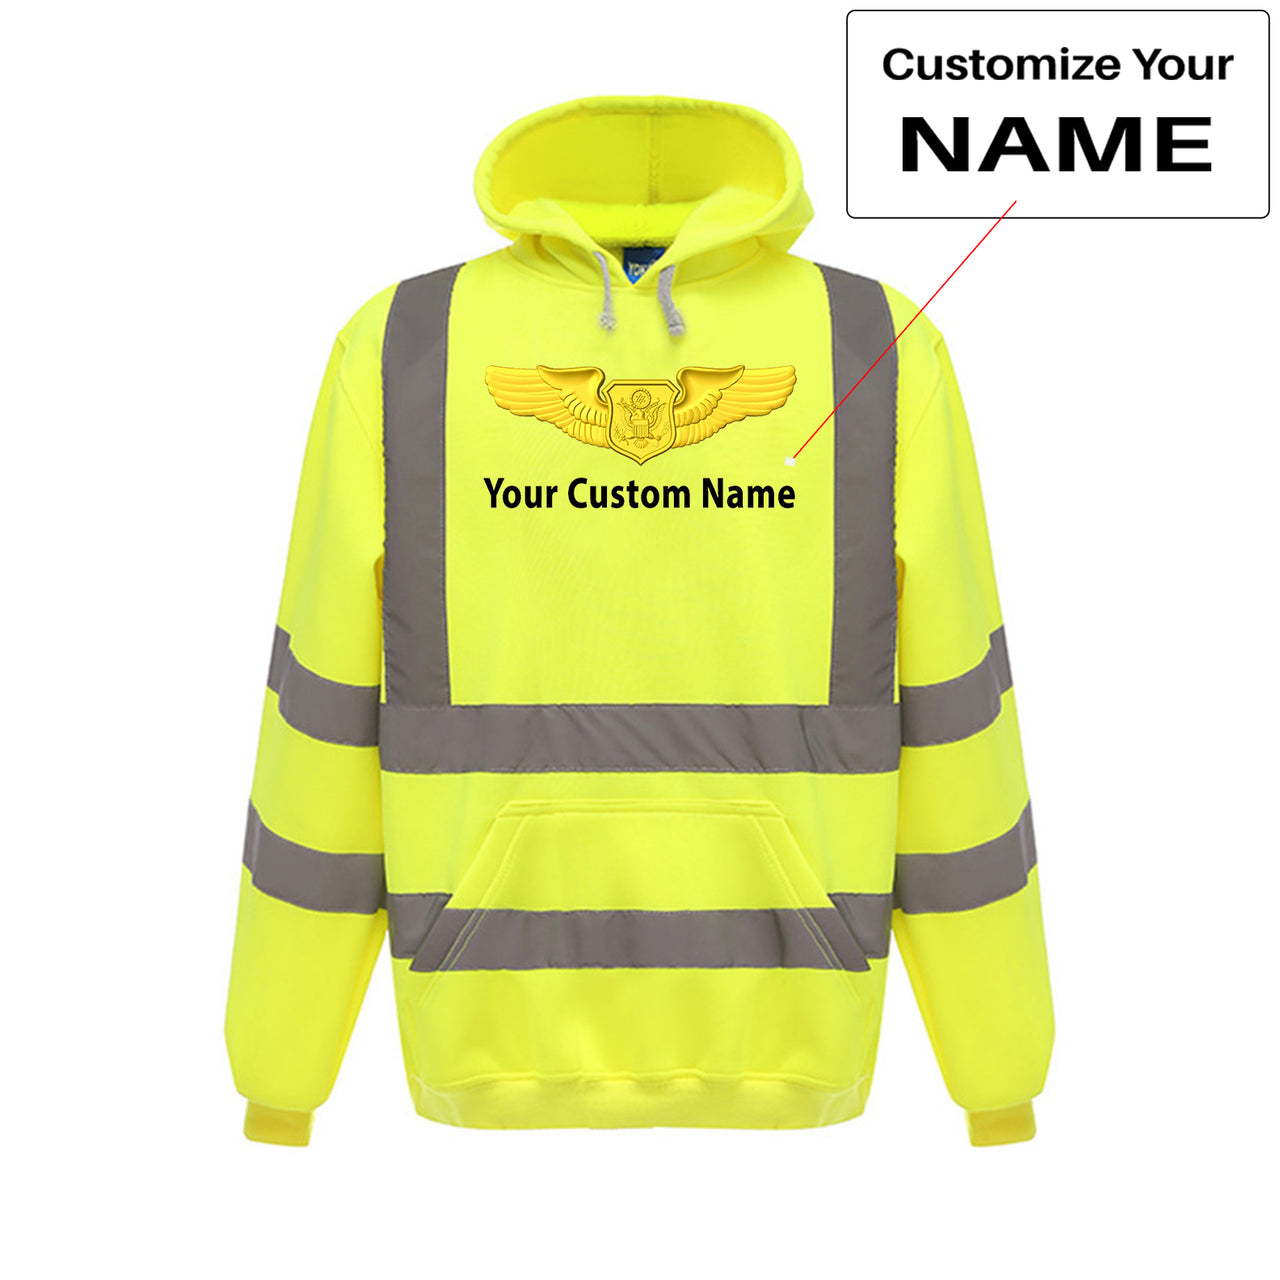 Custom Name (Special US Air Force) Designed Reflective Hoodies